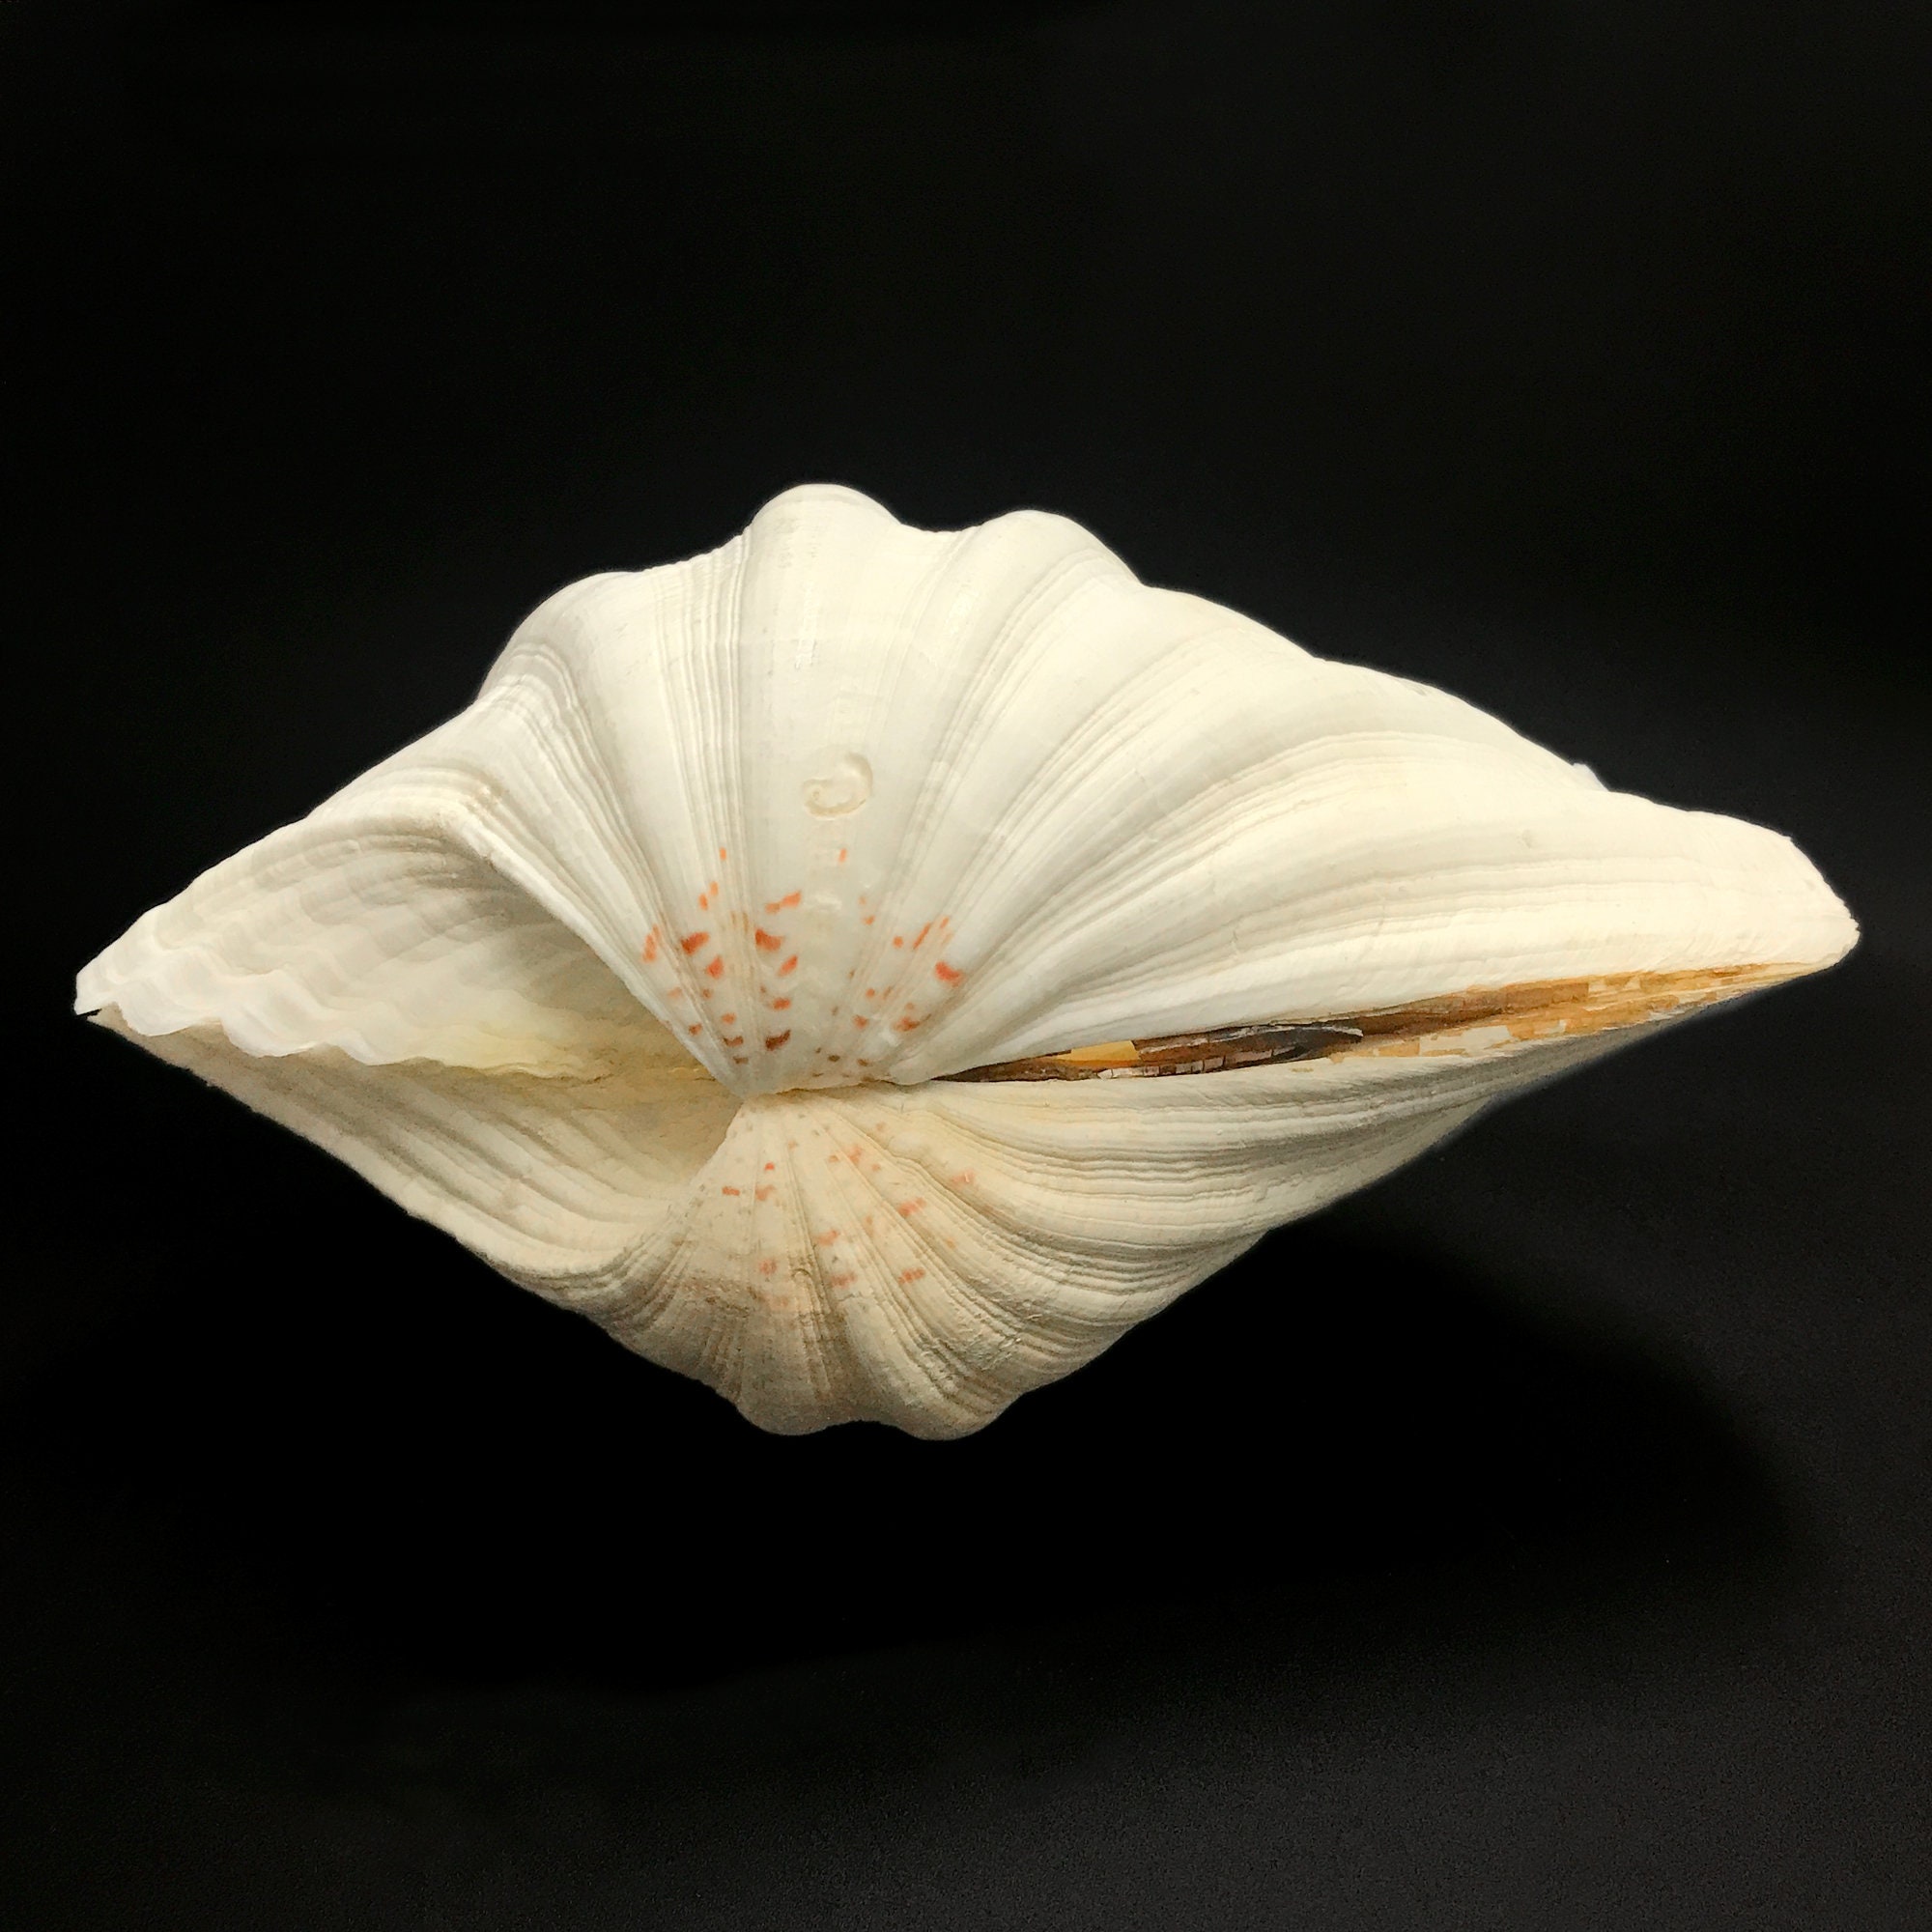 Spotted Clam Seashells - Clycymeris Pectunculus - (approx. 35-40 shells  .5-1.5 inches)